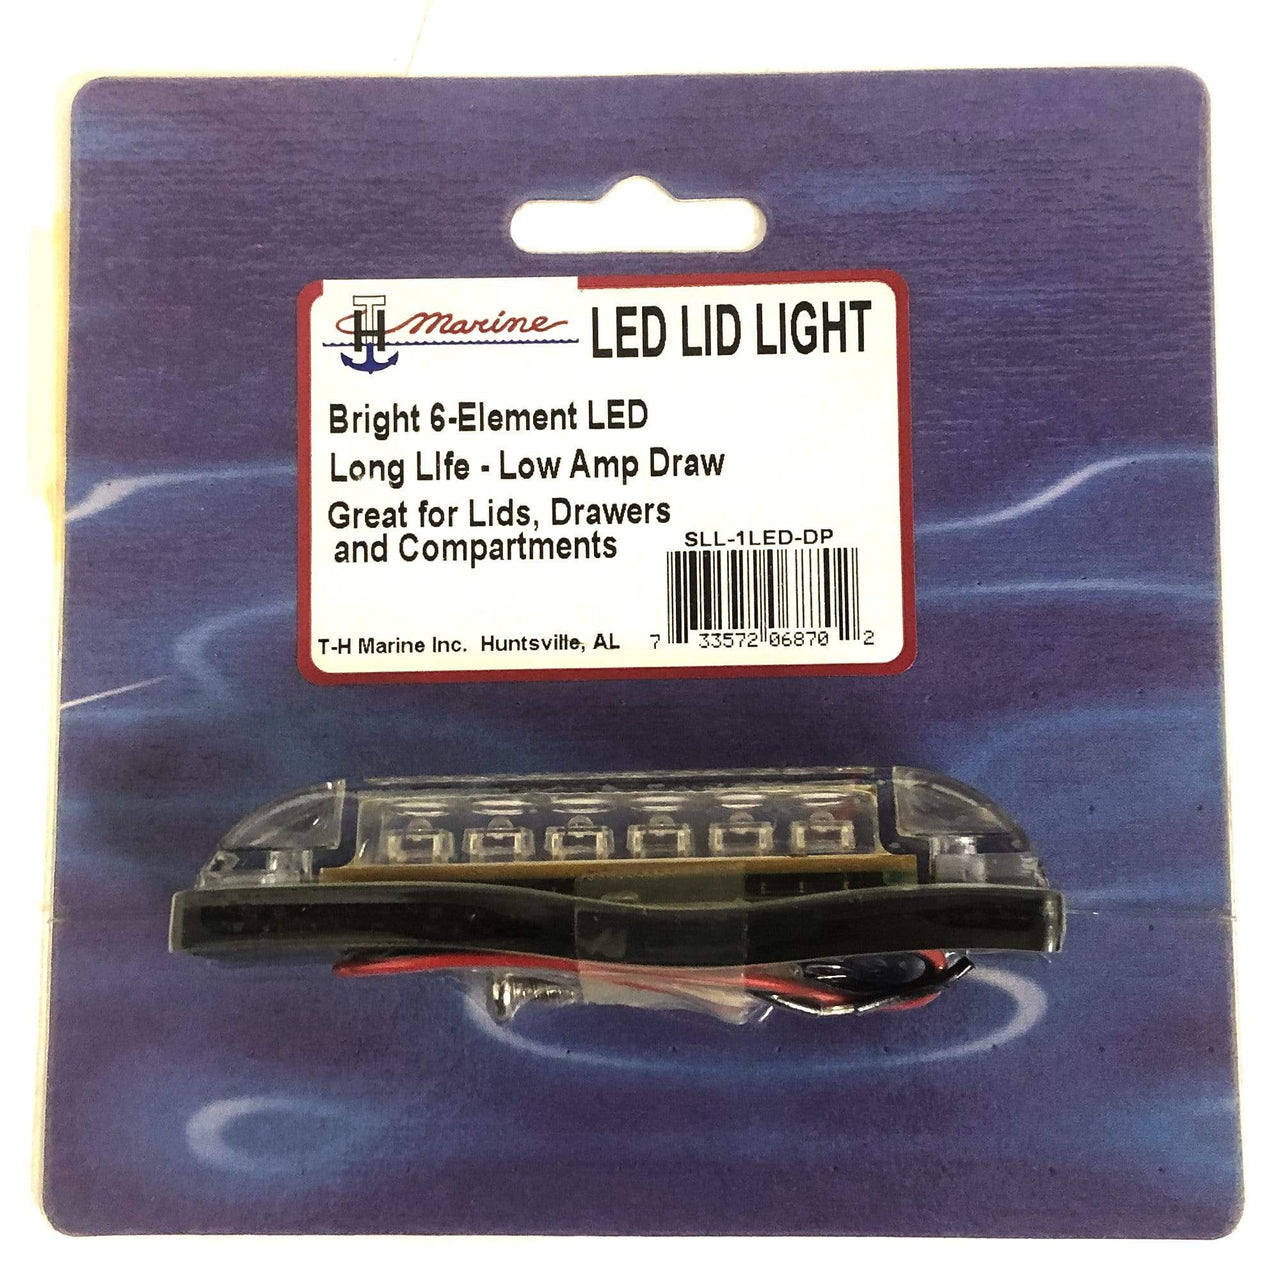 Game-Changing Placements for LED Boat Lights